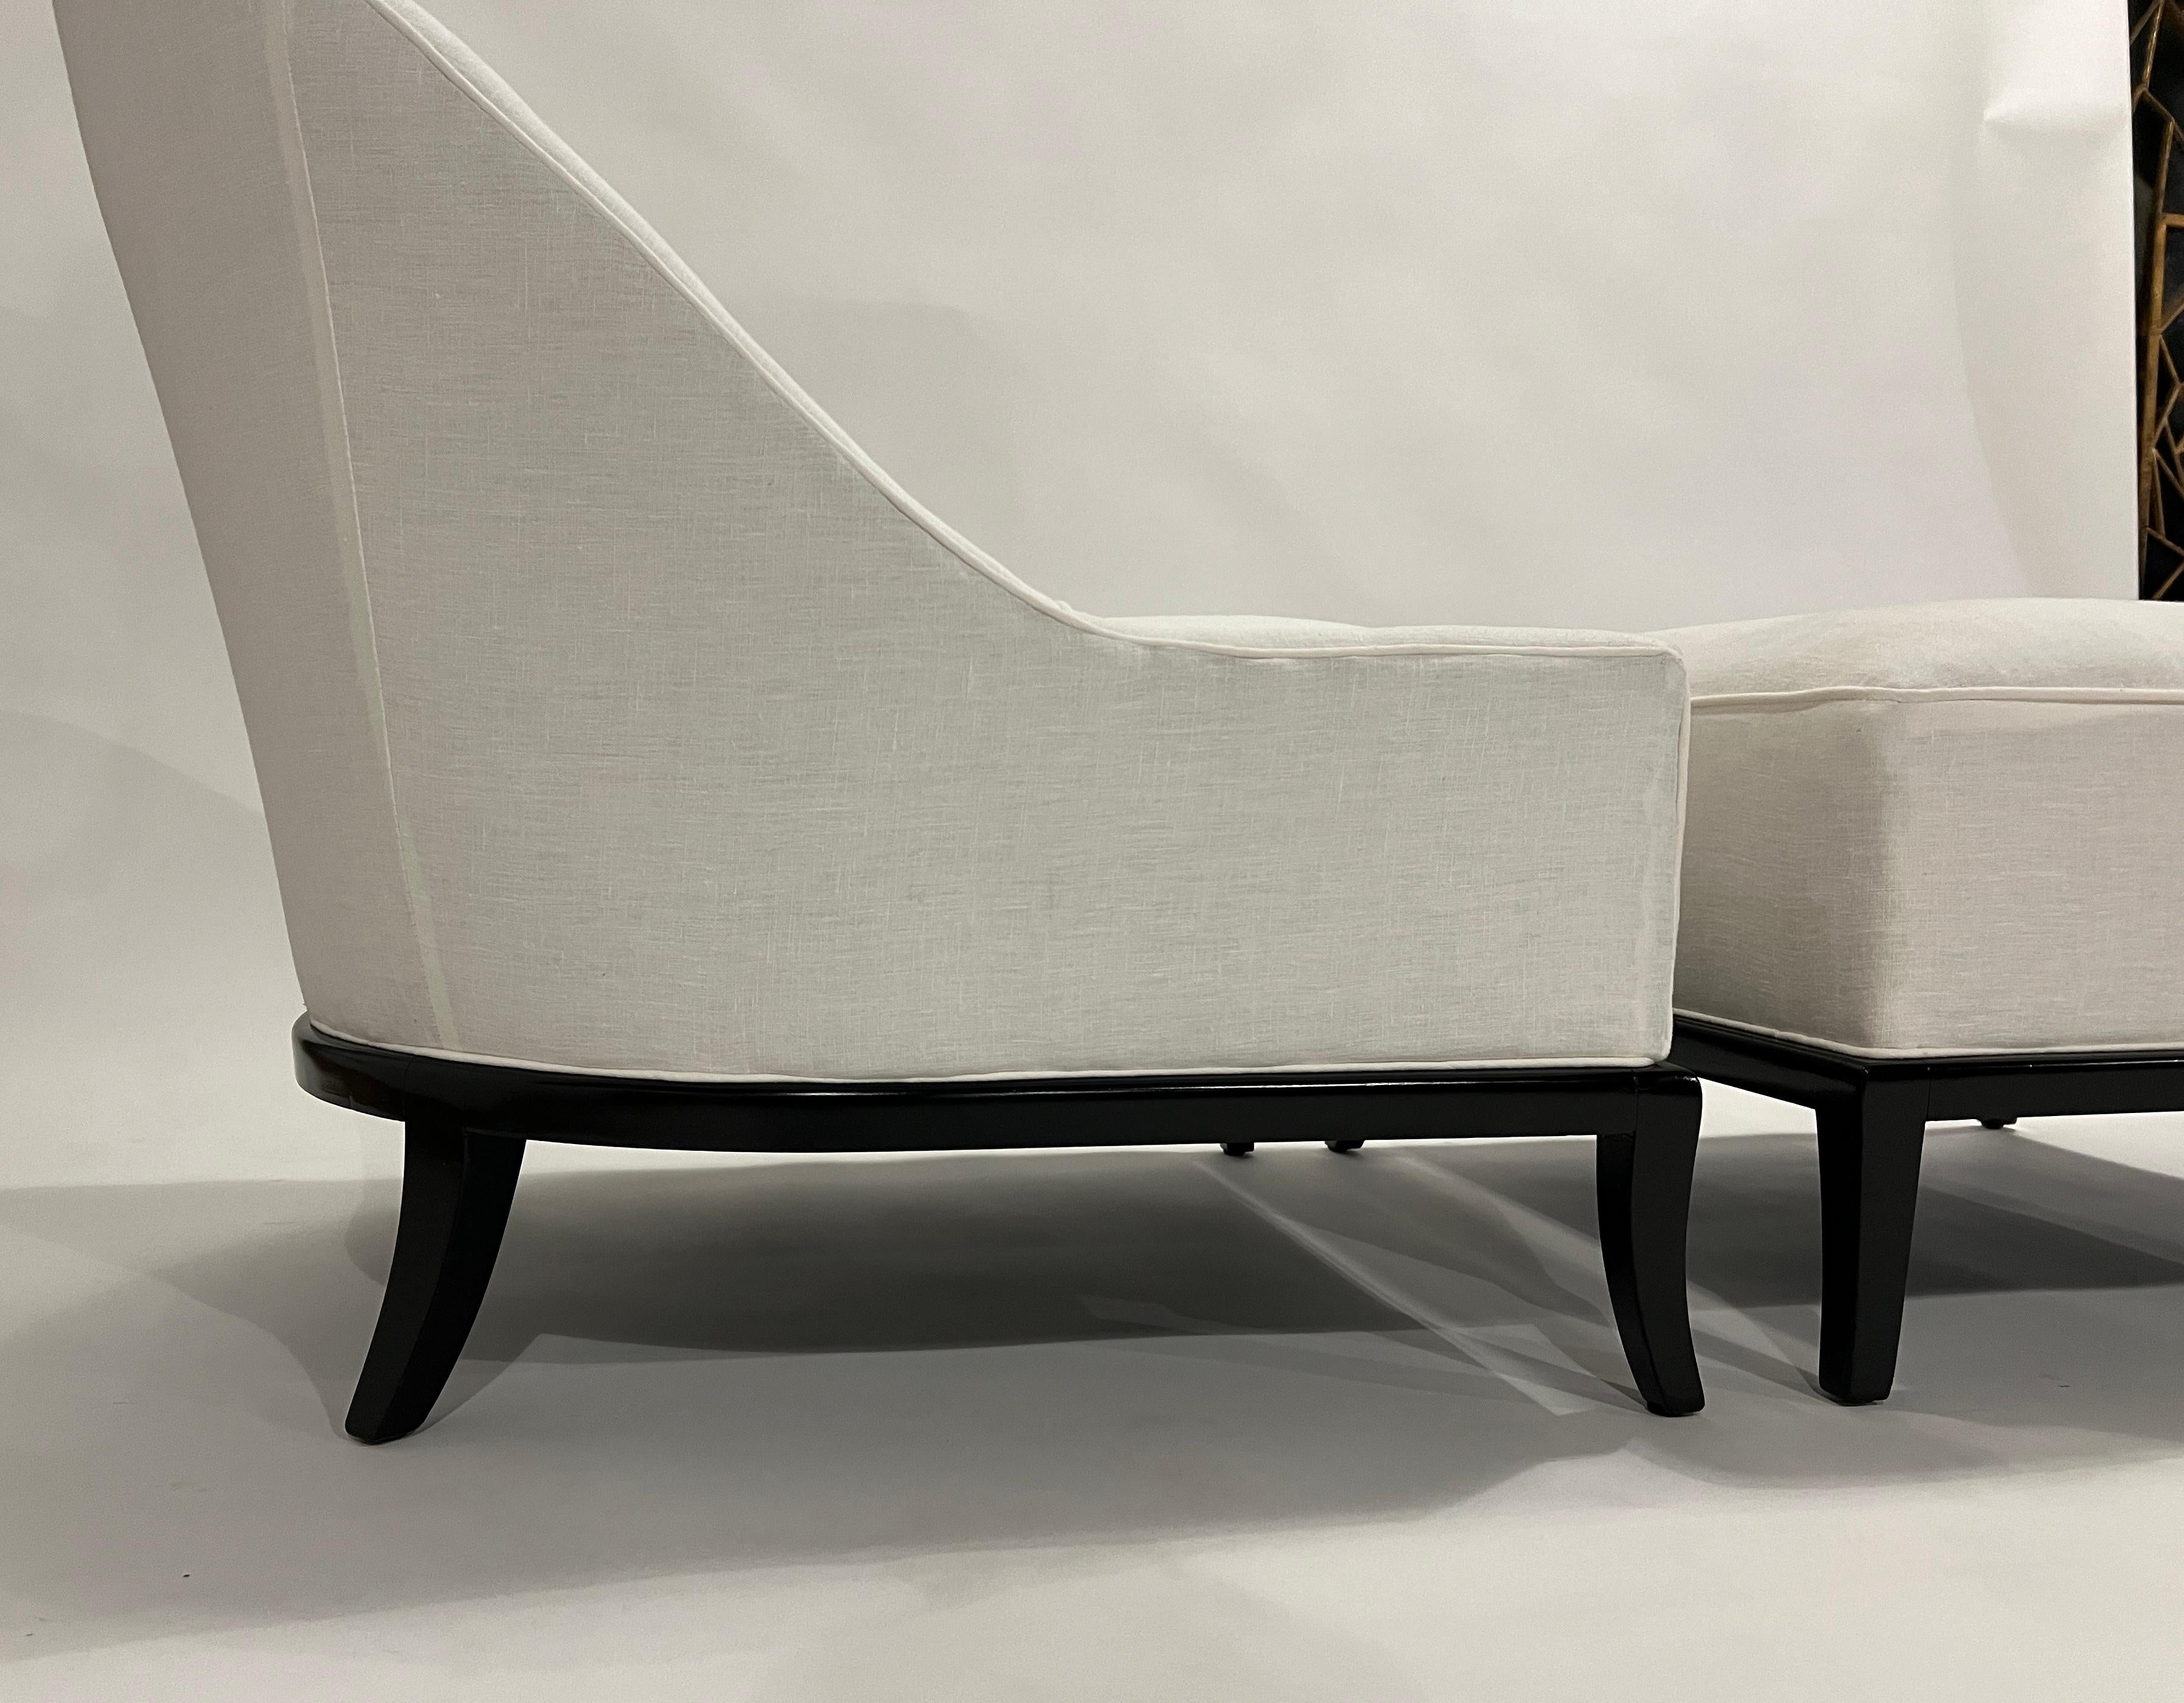 Chic and rare upholstered spoon lounge chair and ottoman set designed by T.H. Robsjohn Gibbings for Widdicomb, 1950's. 

The walnut frame has been lacquered in ebony and the chair has been upholstered in a white linen fabric. 

Chair measures 26